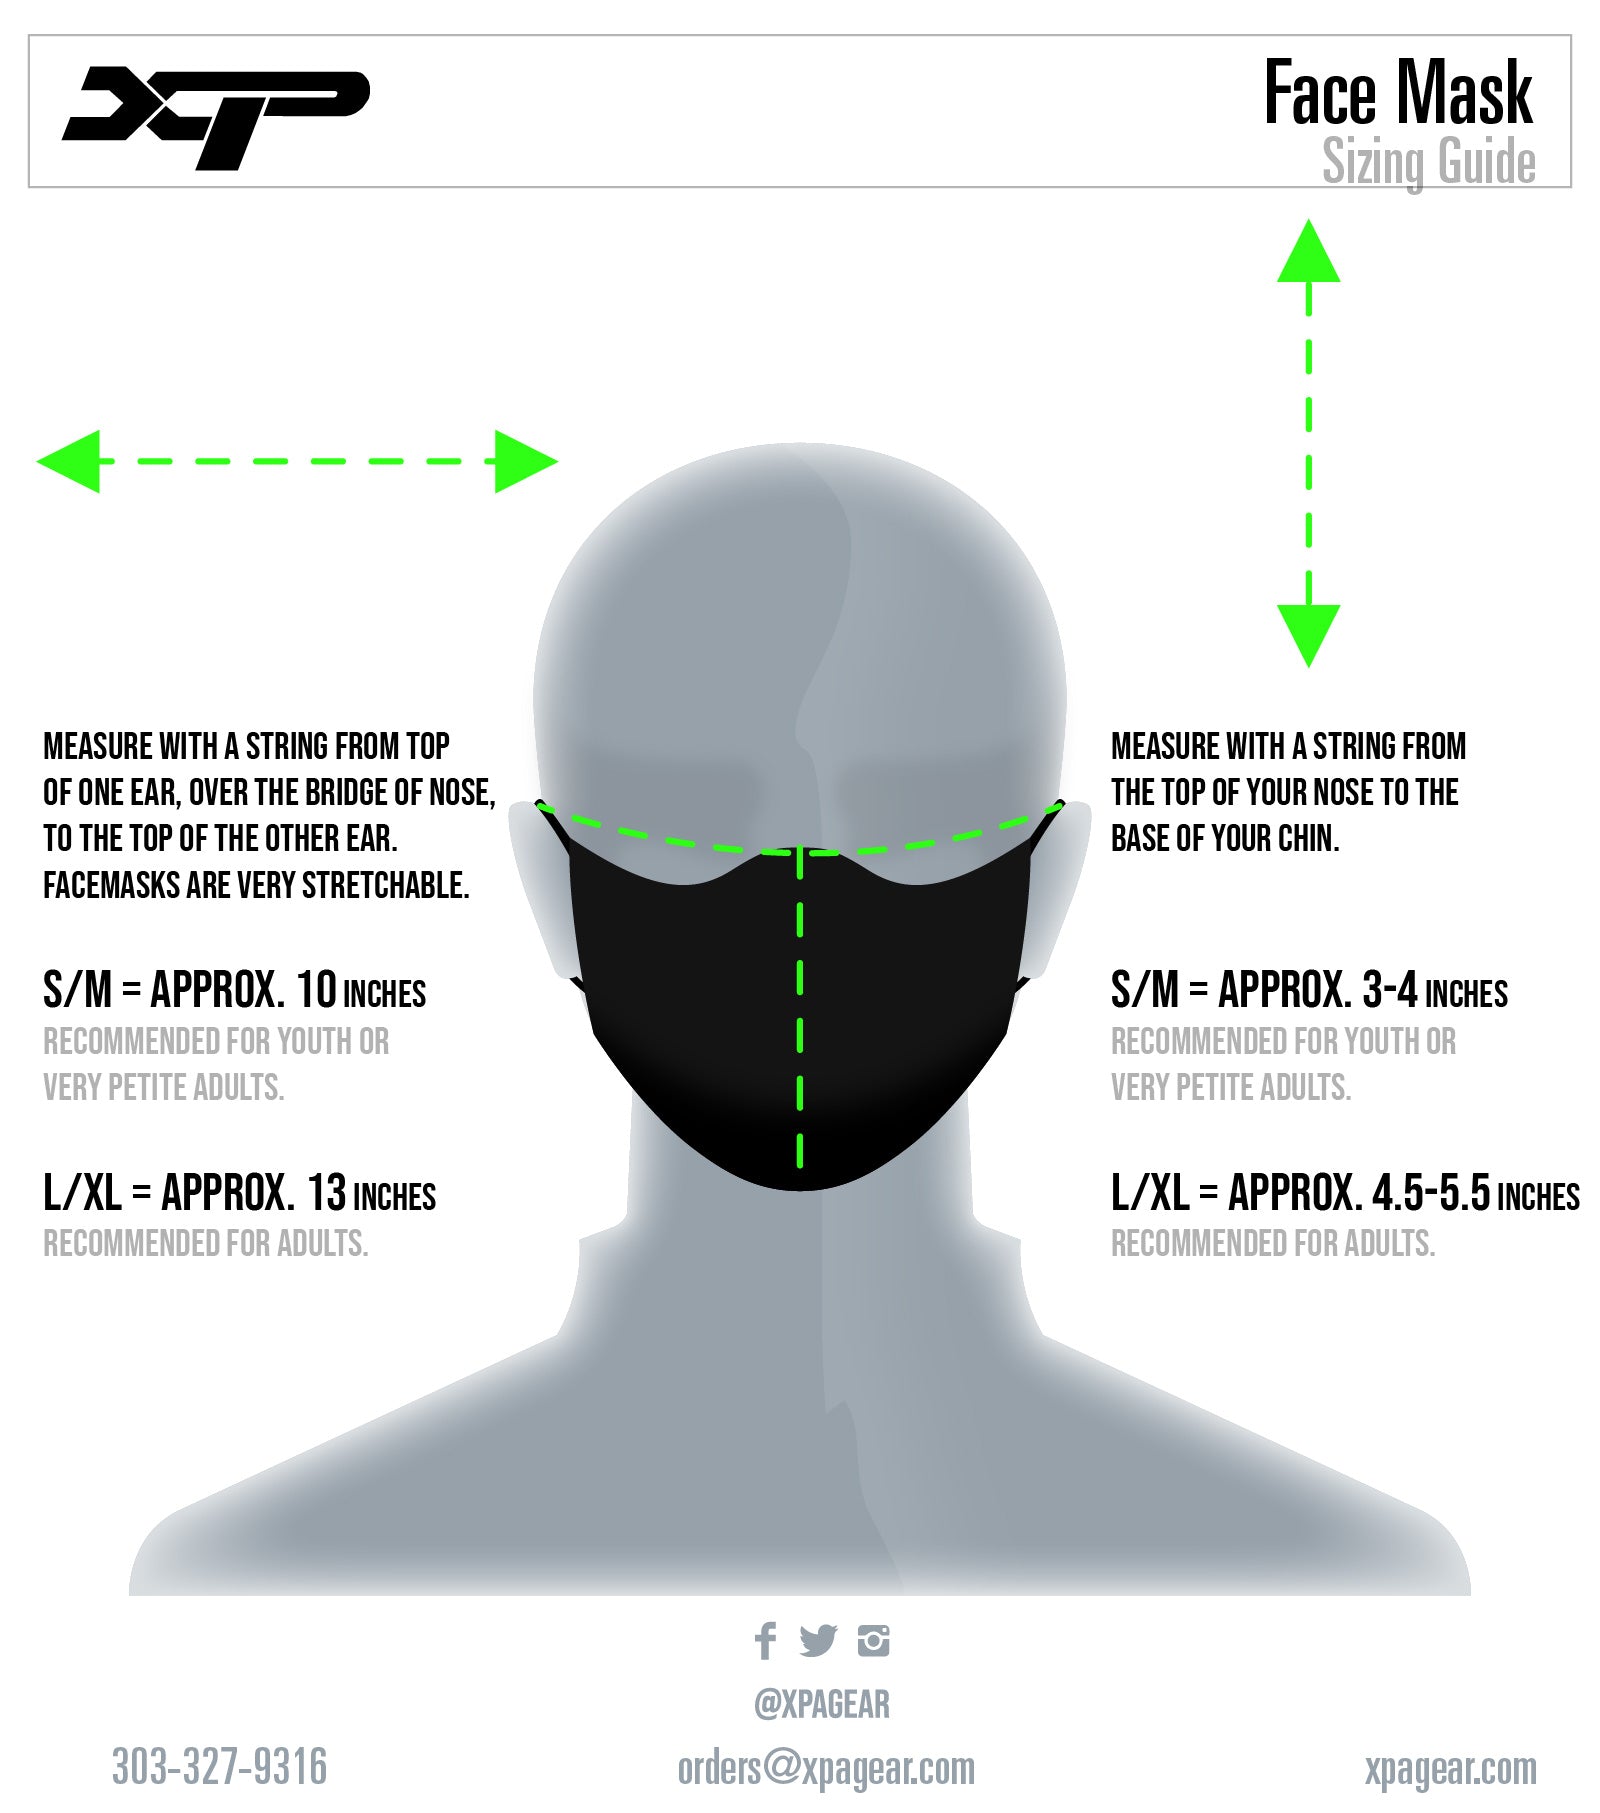 Sublimated Antimicrobial Face Mask in White Camo Xtreme Pro Apparel